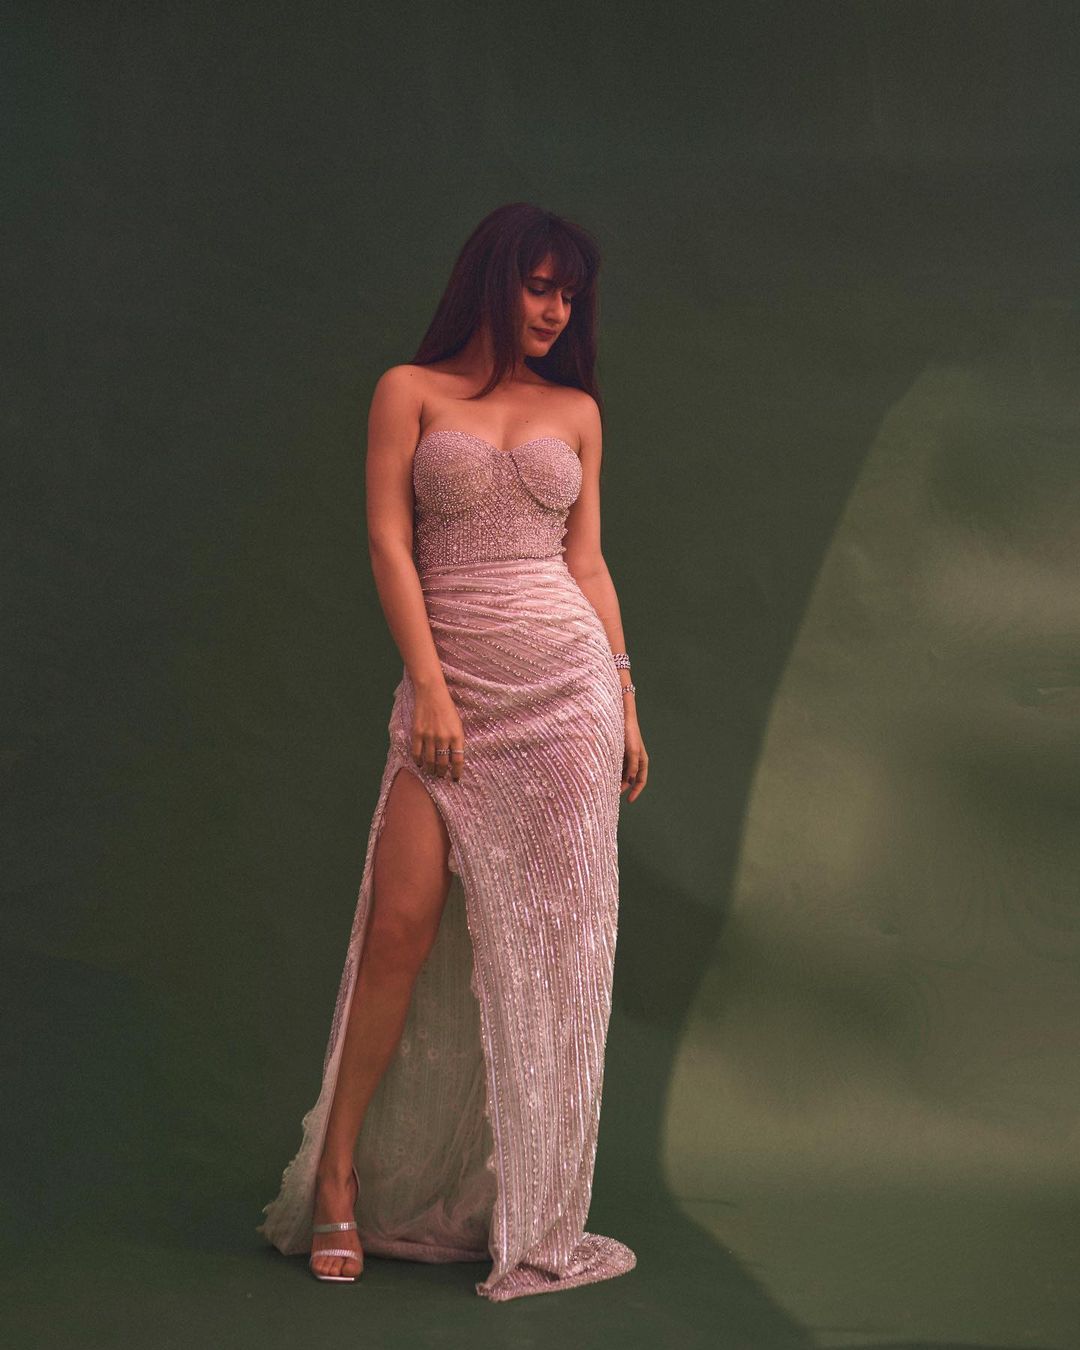 Fatima Sana Shaikh strikes a pose in the gown with a thigh-high slit